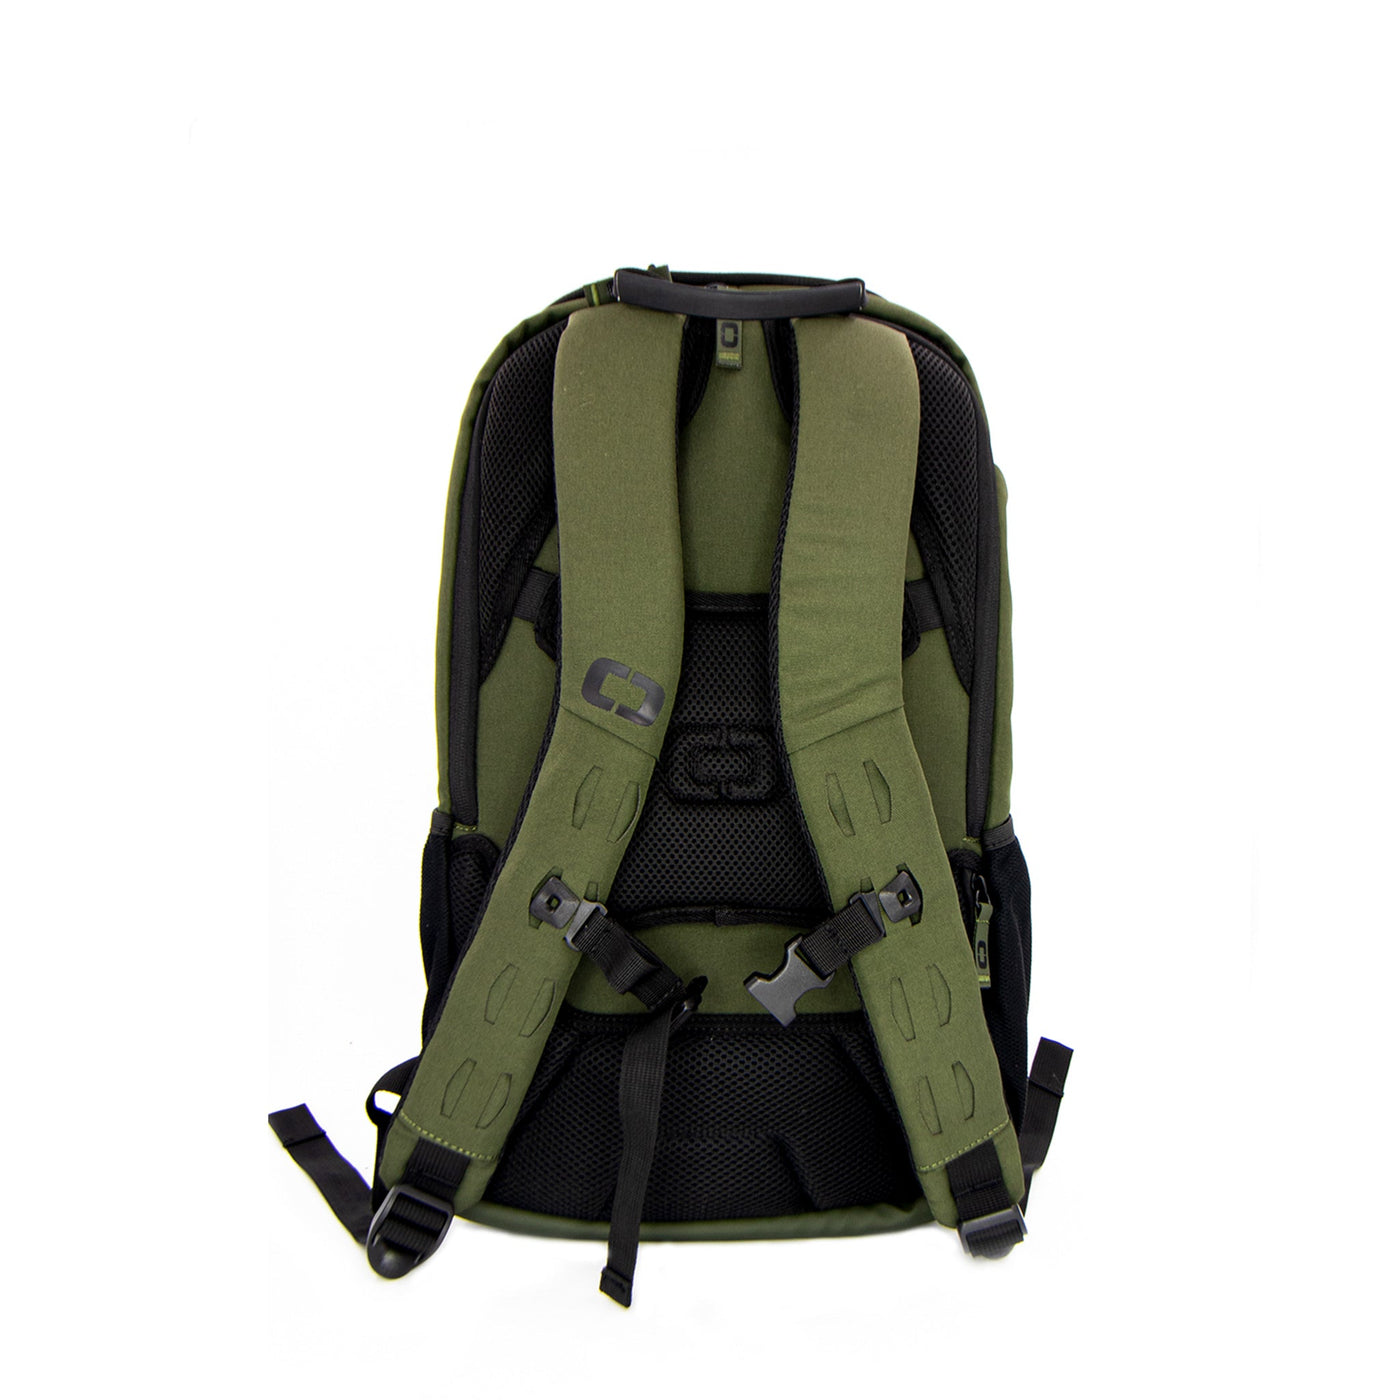 American Hero Olive Green Backpack - Carry The Load Shop